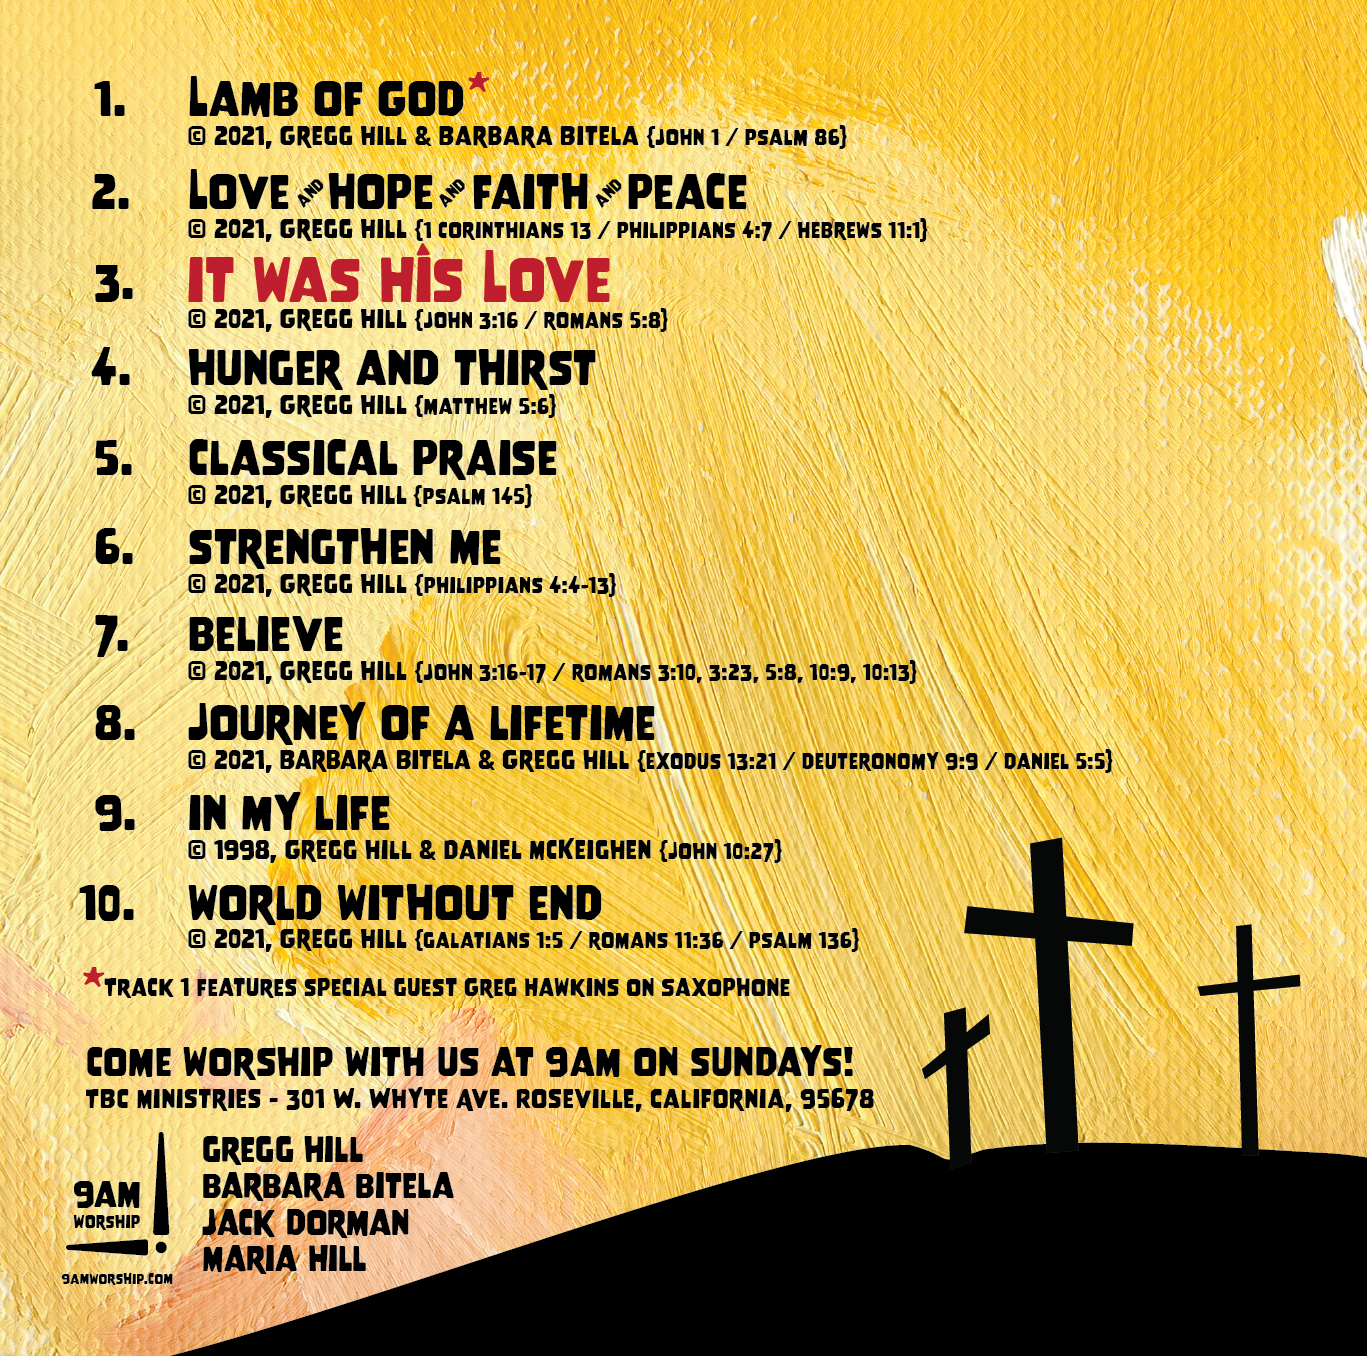 Album insert for "it was His Love" by 9am worship